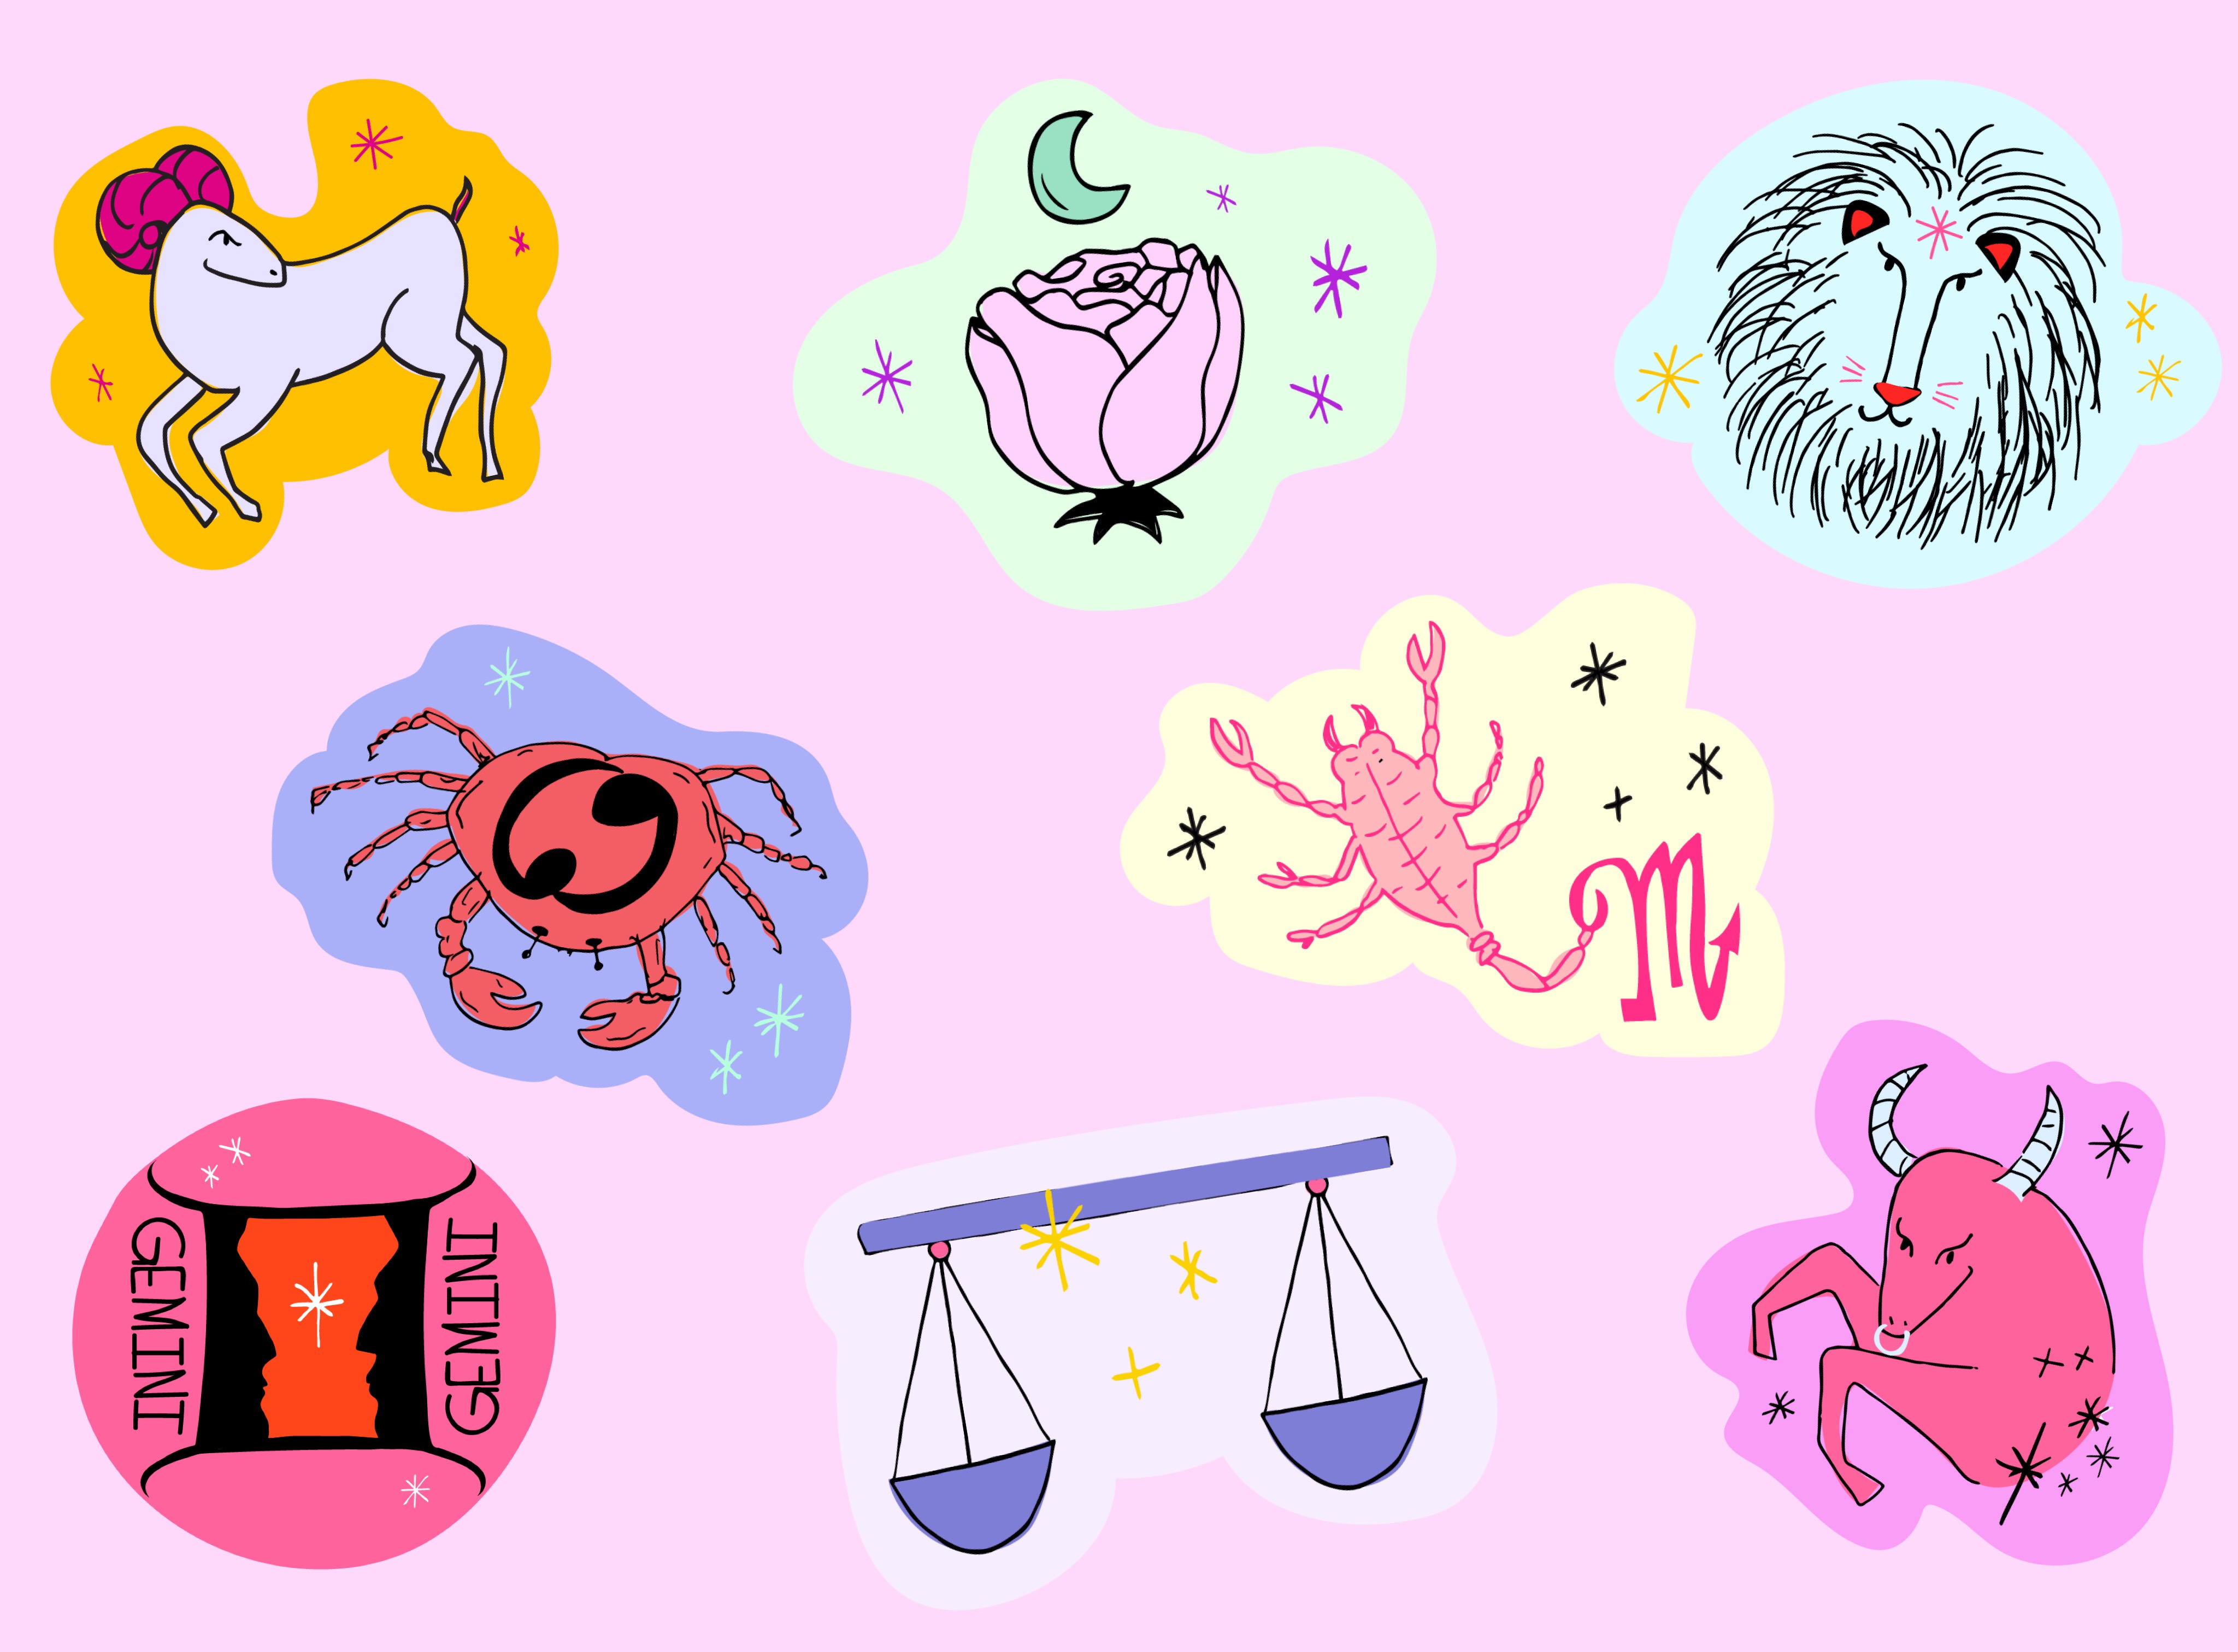 The image (background and stickers) was made on the graphic design app, Canva. The zodiac stickersThe image features a millennial pink background with eight stickers (drawings) of different zodiac signs scattered around in no particular order. The featured signs and symbols include Aries (ram), Cancer (crab), Gemini (twins), Virgo (rose), Scorpio (scorpion), Libra (scales), Leo (lion) and Taurus (bull). are by Allison Jester (Canva).